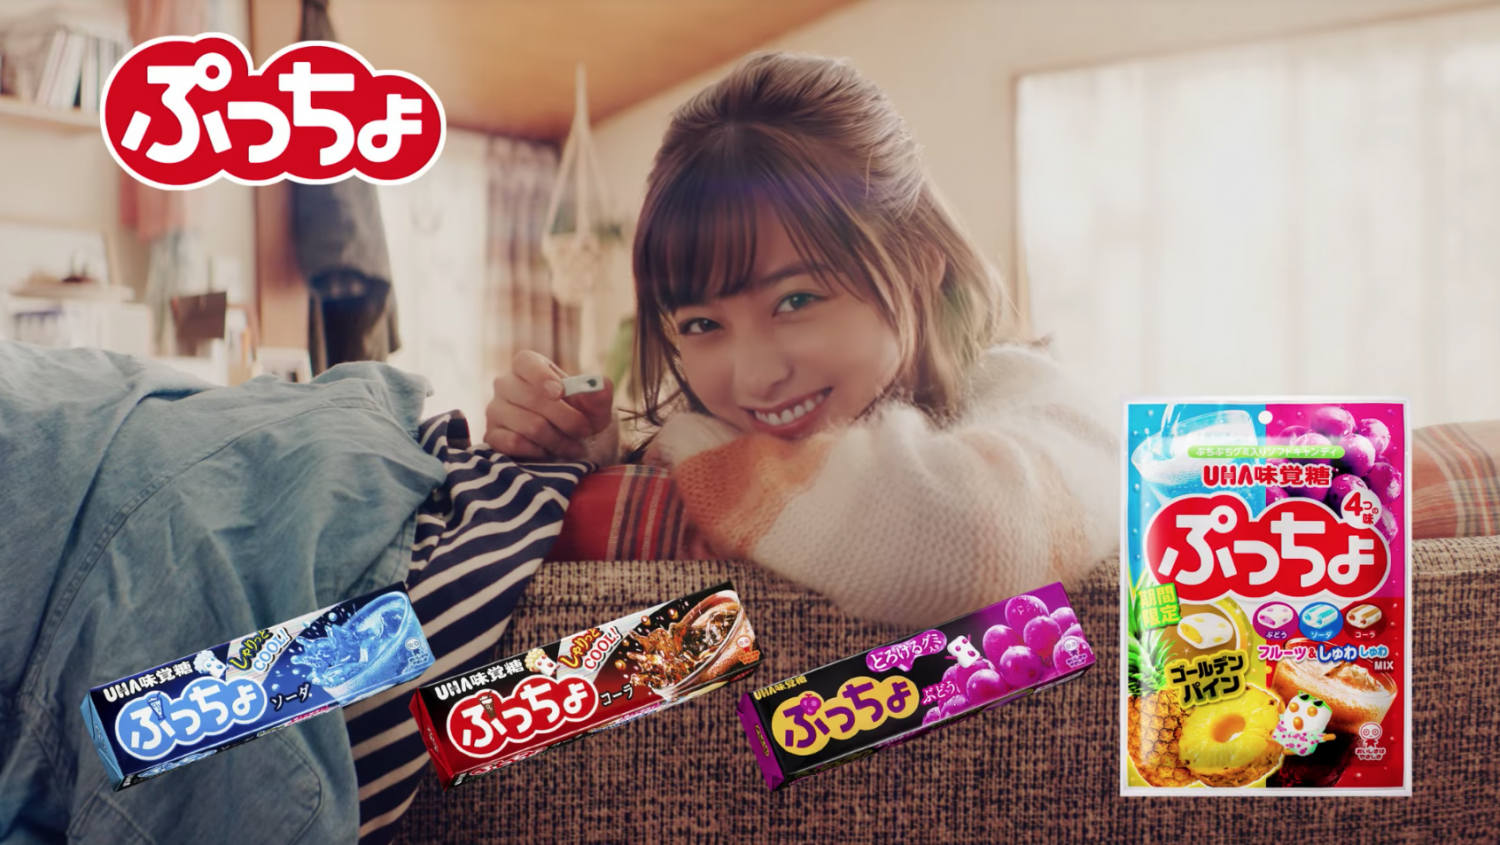 5 Japanese Commercial Series You’ll Want to Watch to the End